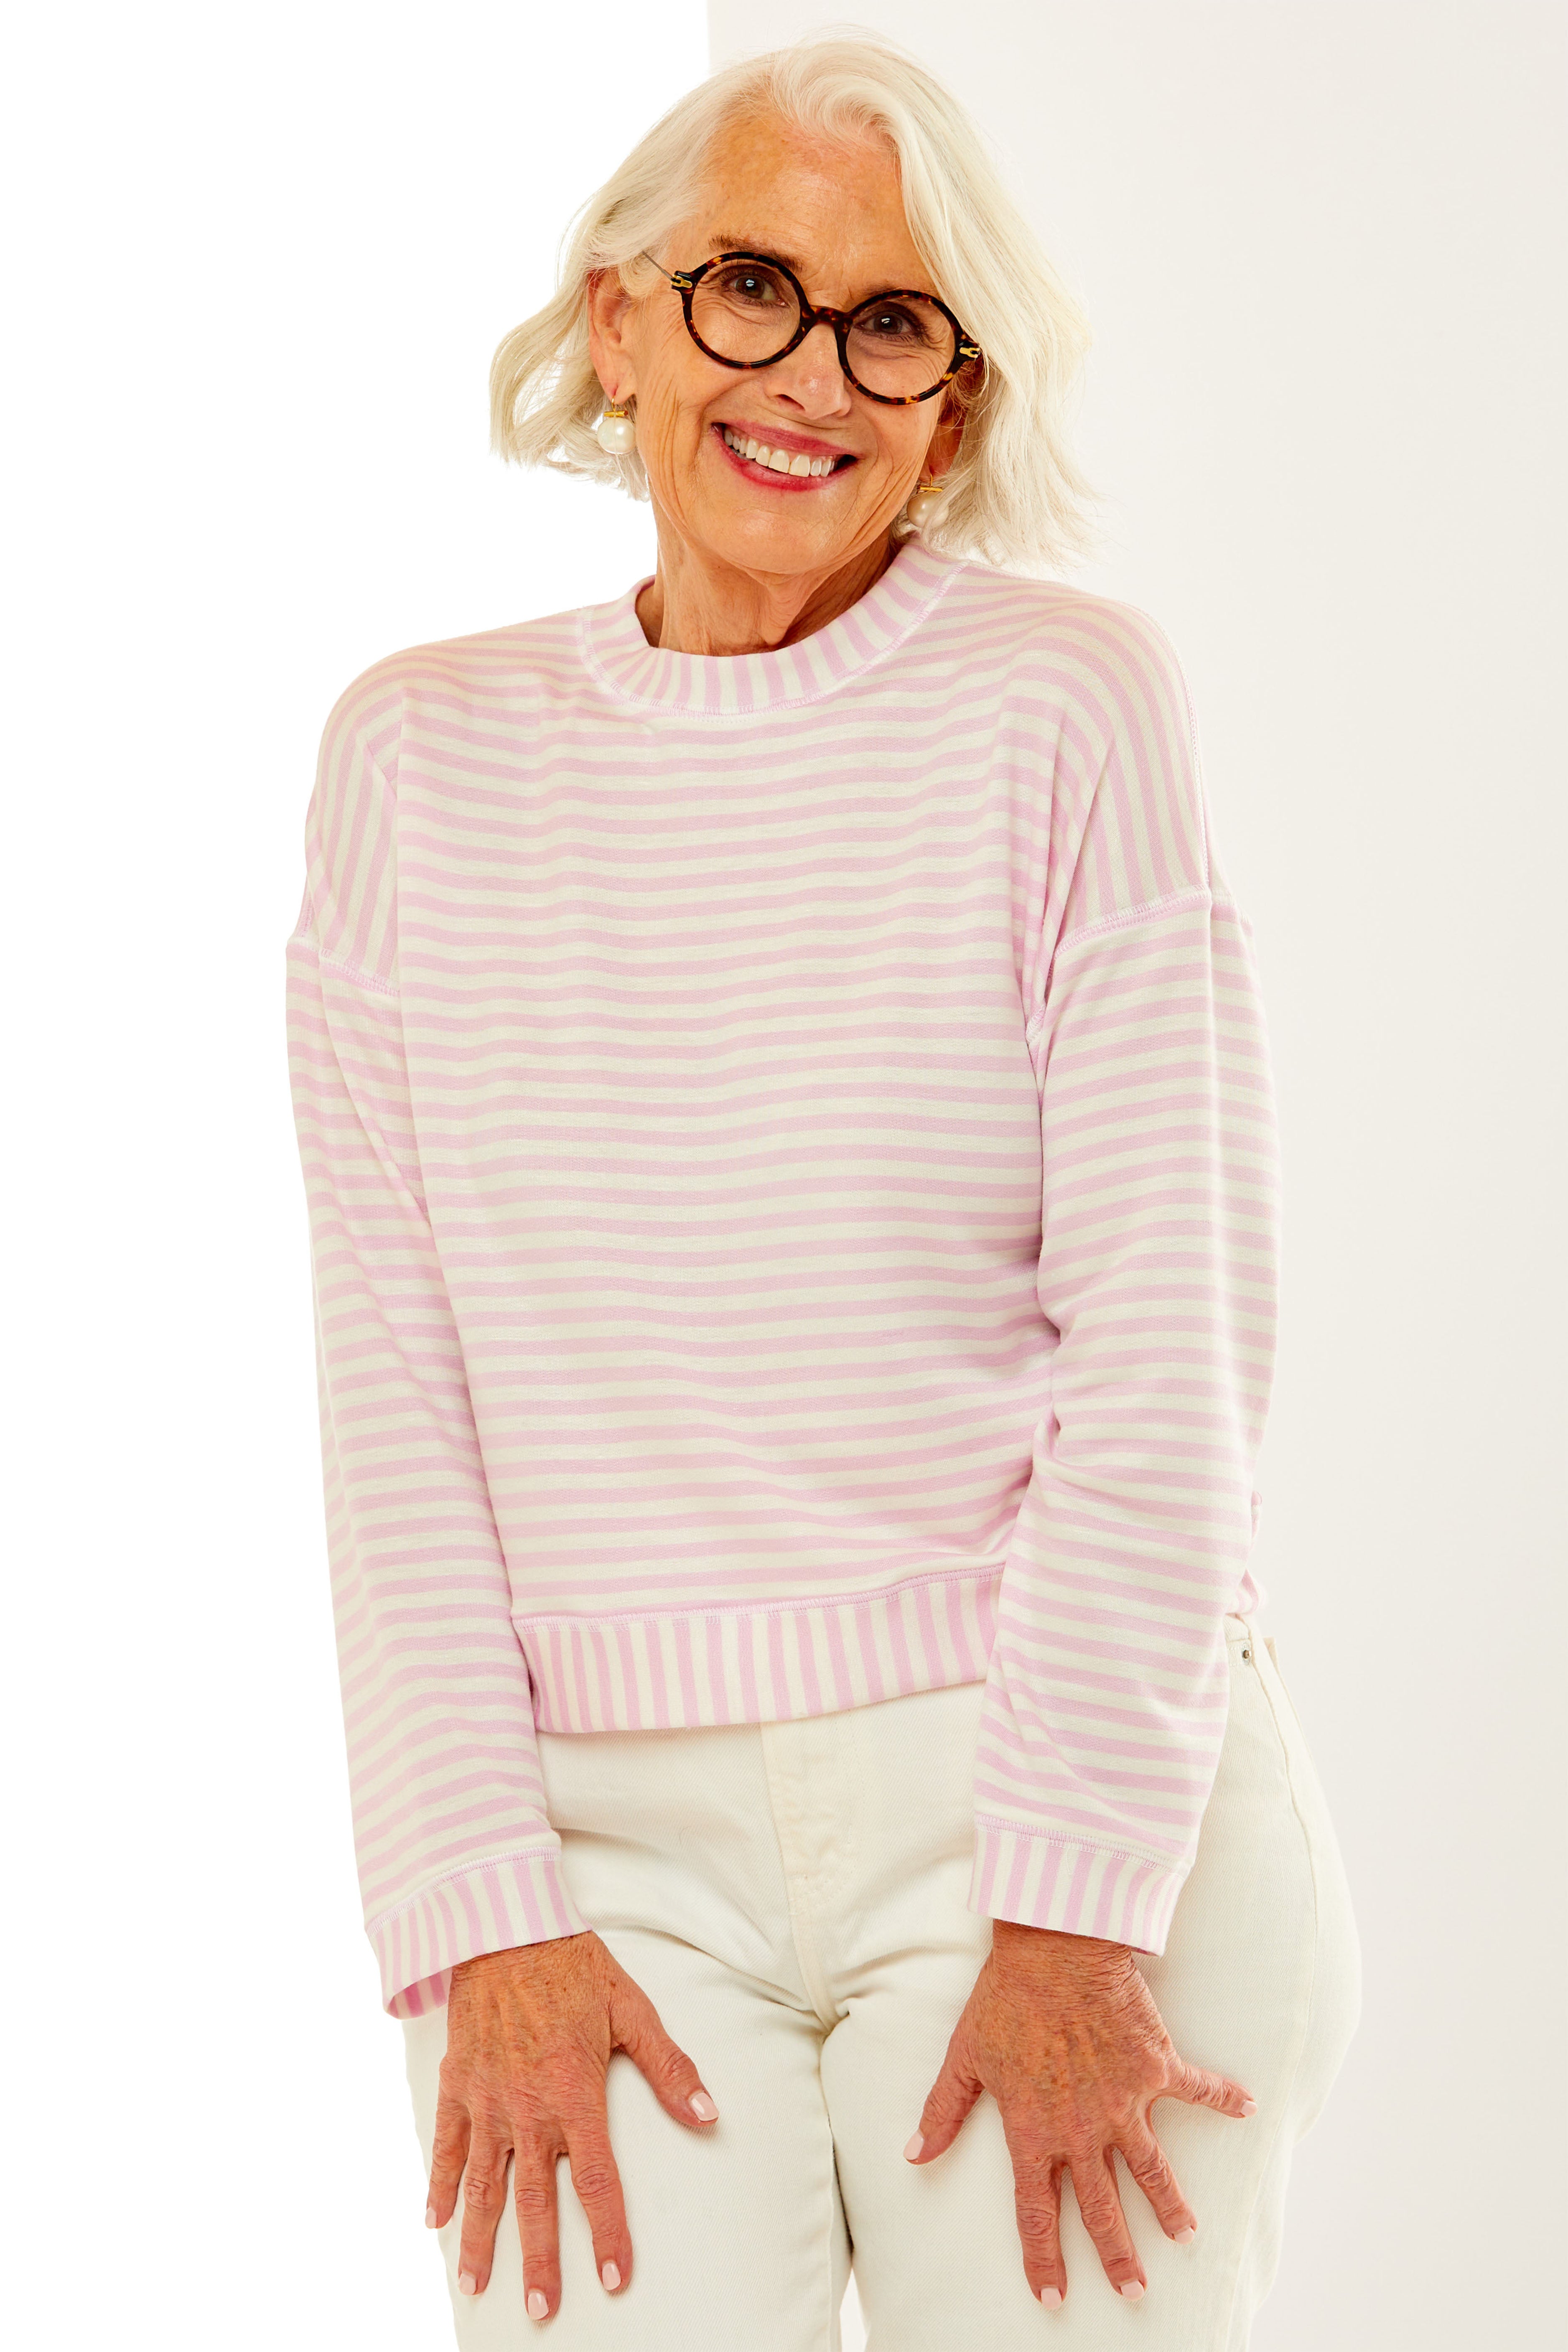 Woman in pink/white stripe top